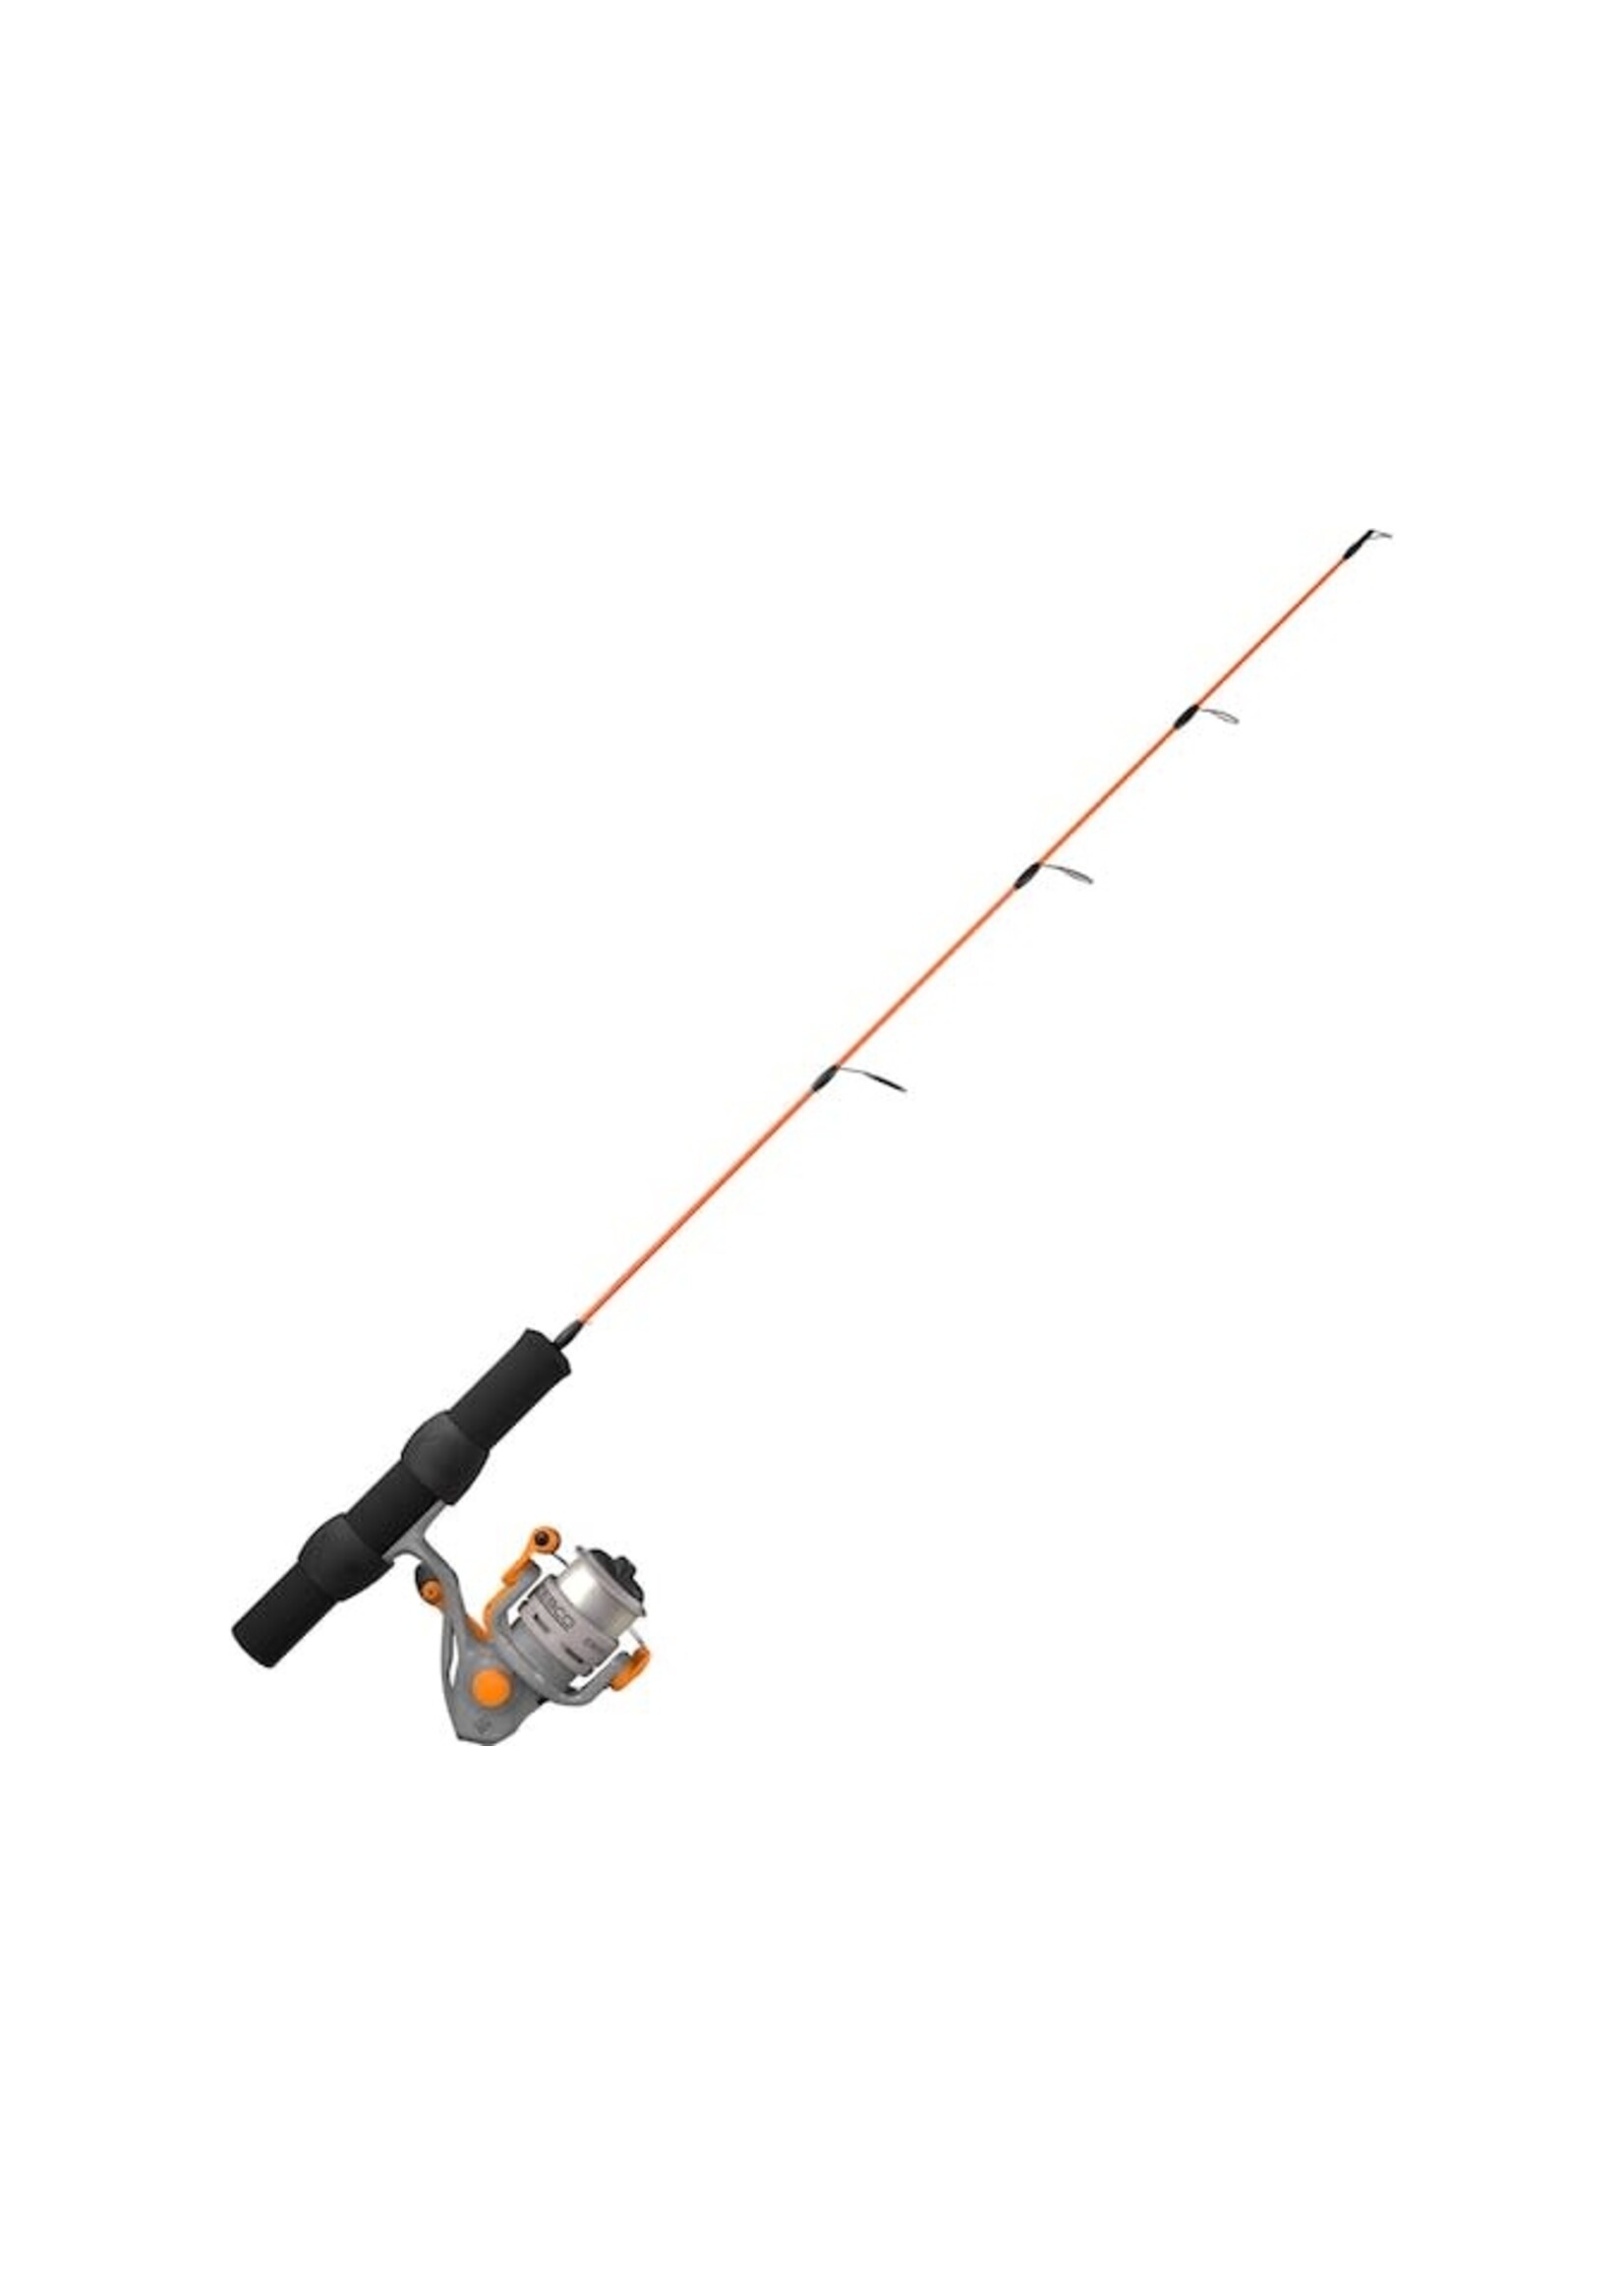 Zebco Spinning Combo Medium Light Fishing Rod & Reel Combos for